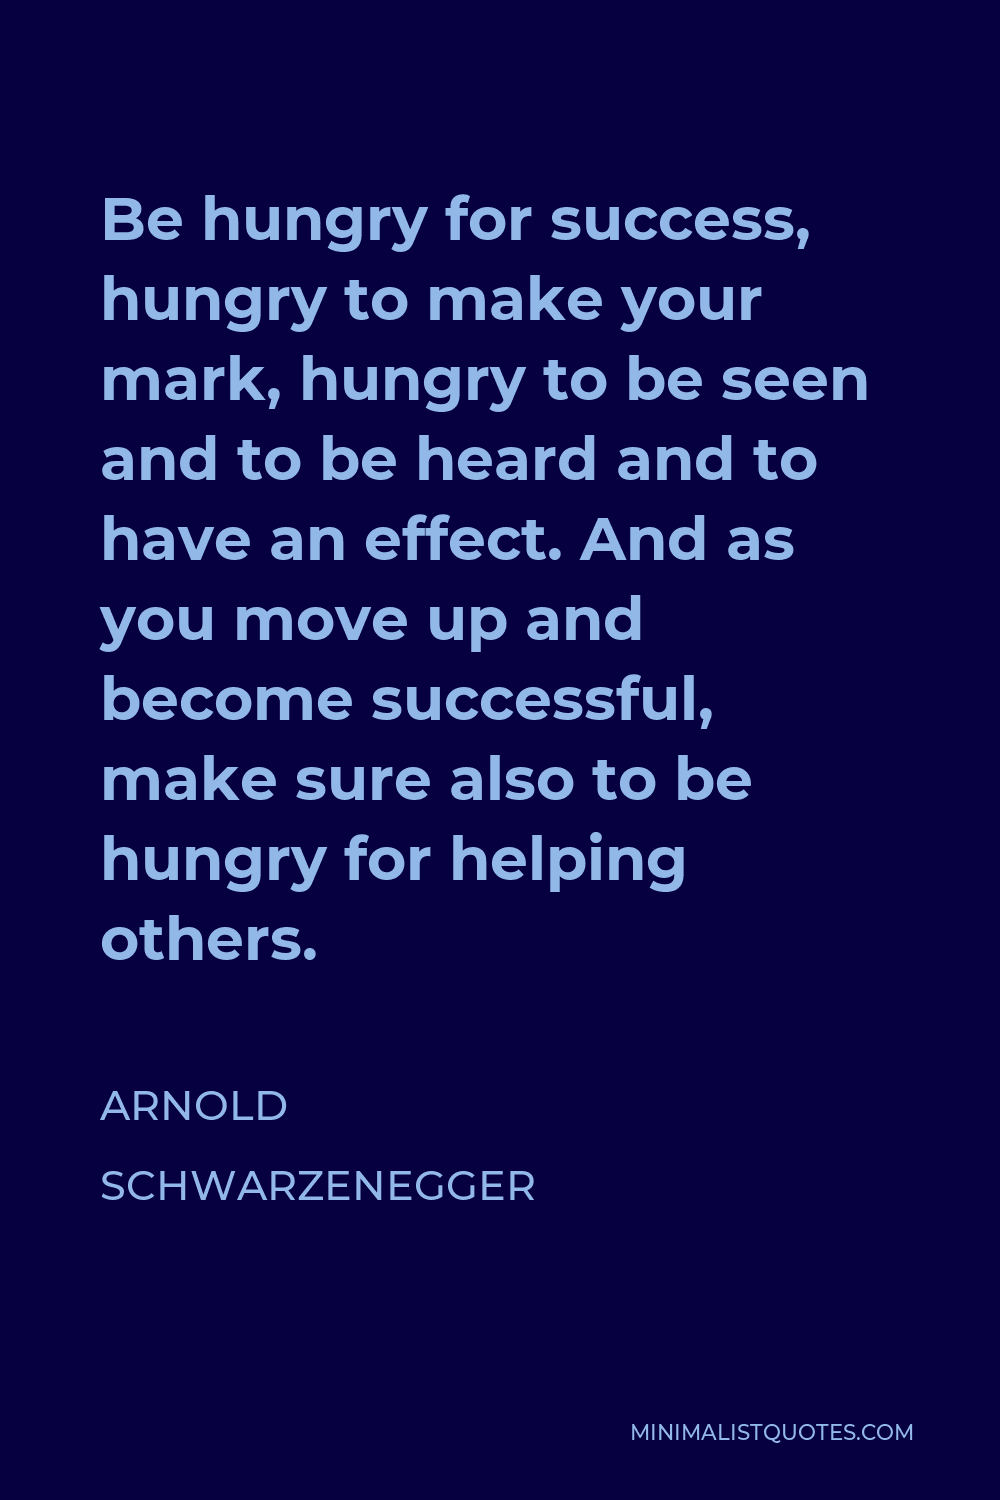 Arnold Schwarzenegger Quote - Be hungry for success, hungry to make your mark, hungry to be seen and to be heard and to have an effect. And as you move up and become successful, make sure also to be hungry for helping others.